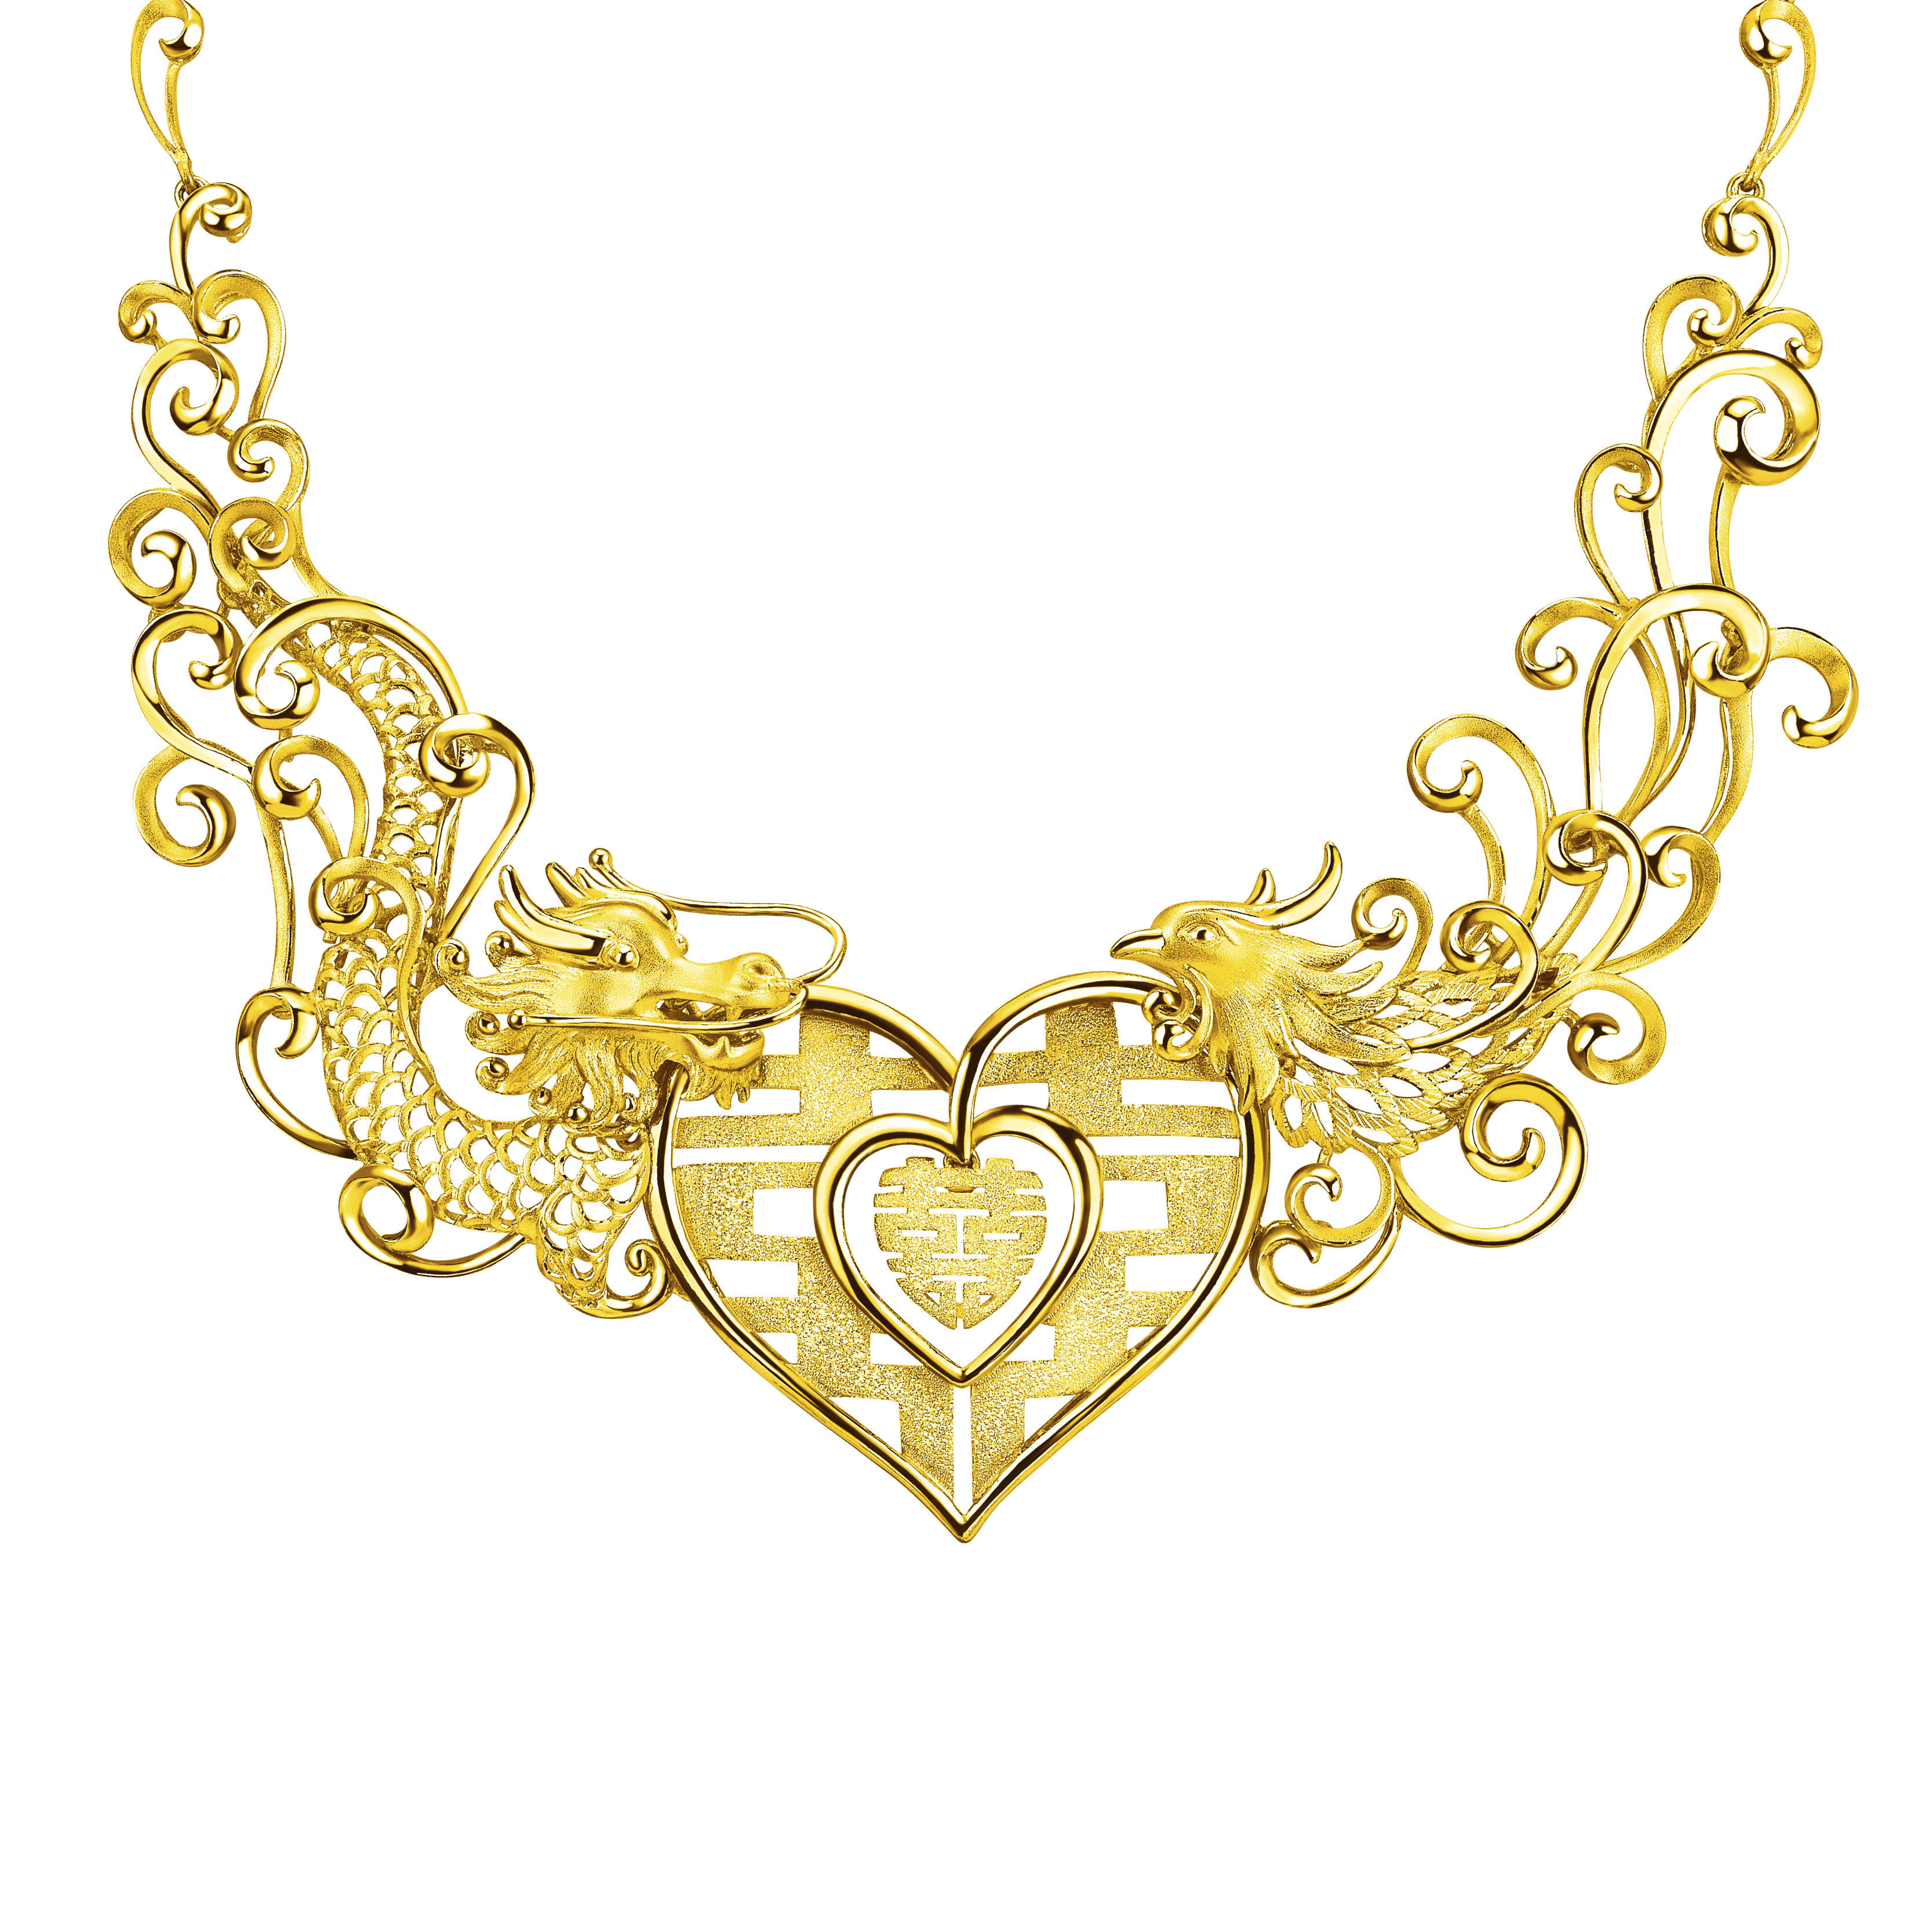 Beloved Collection "Heart beats as One" Gold Necklace